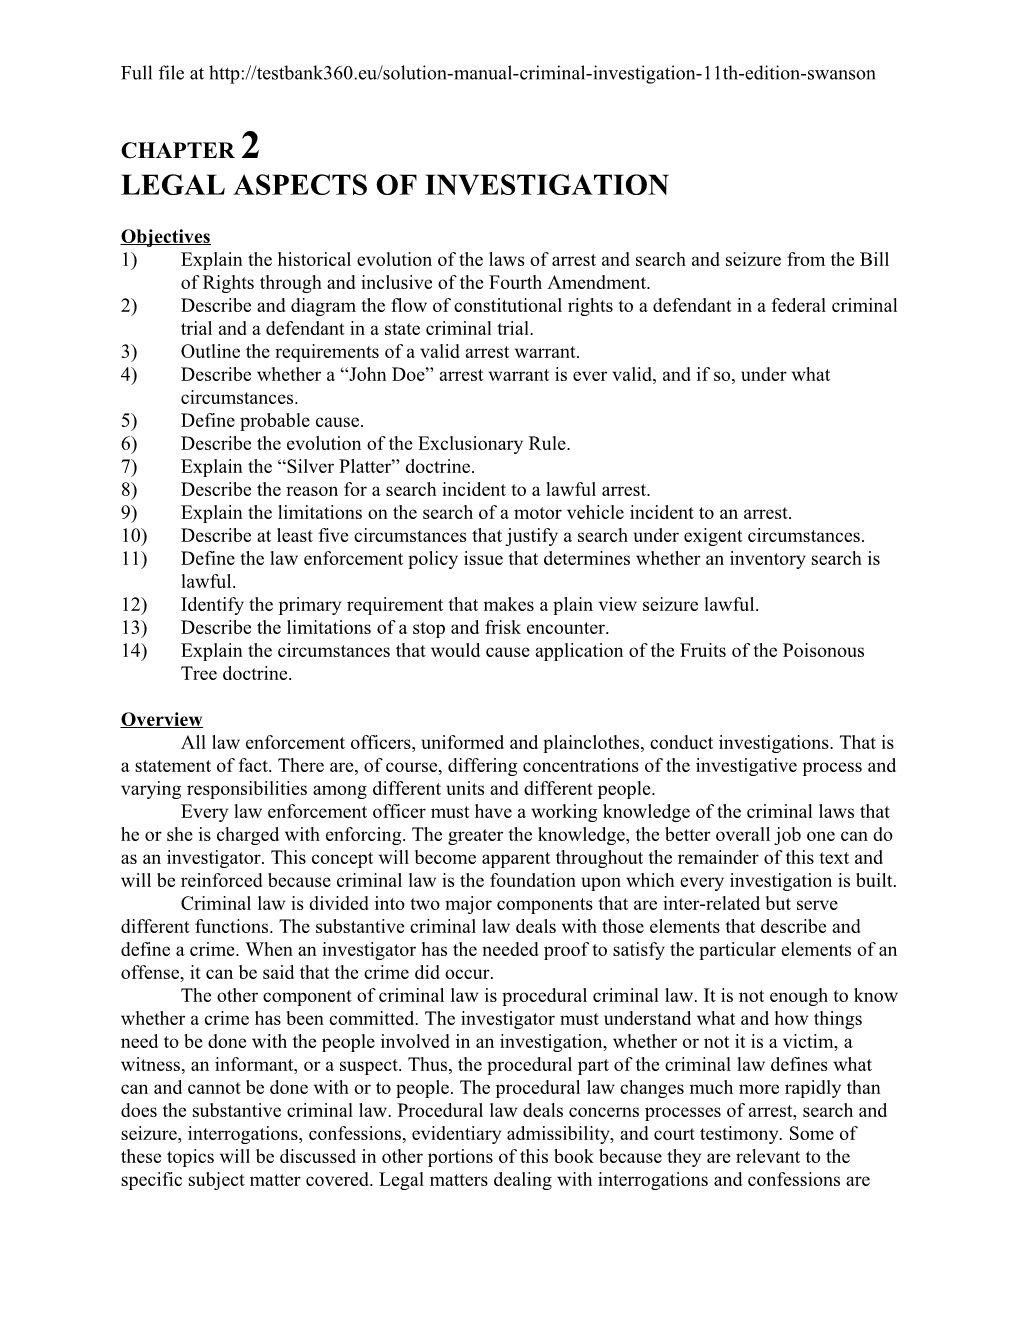 Legal Aspects of Investigation